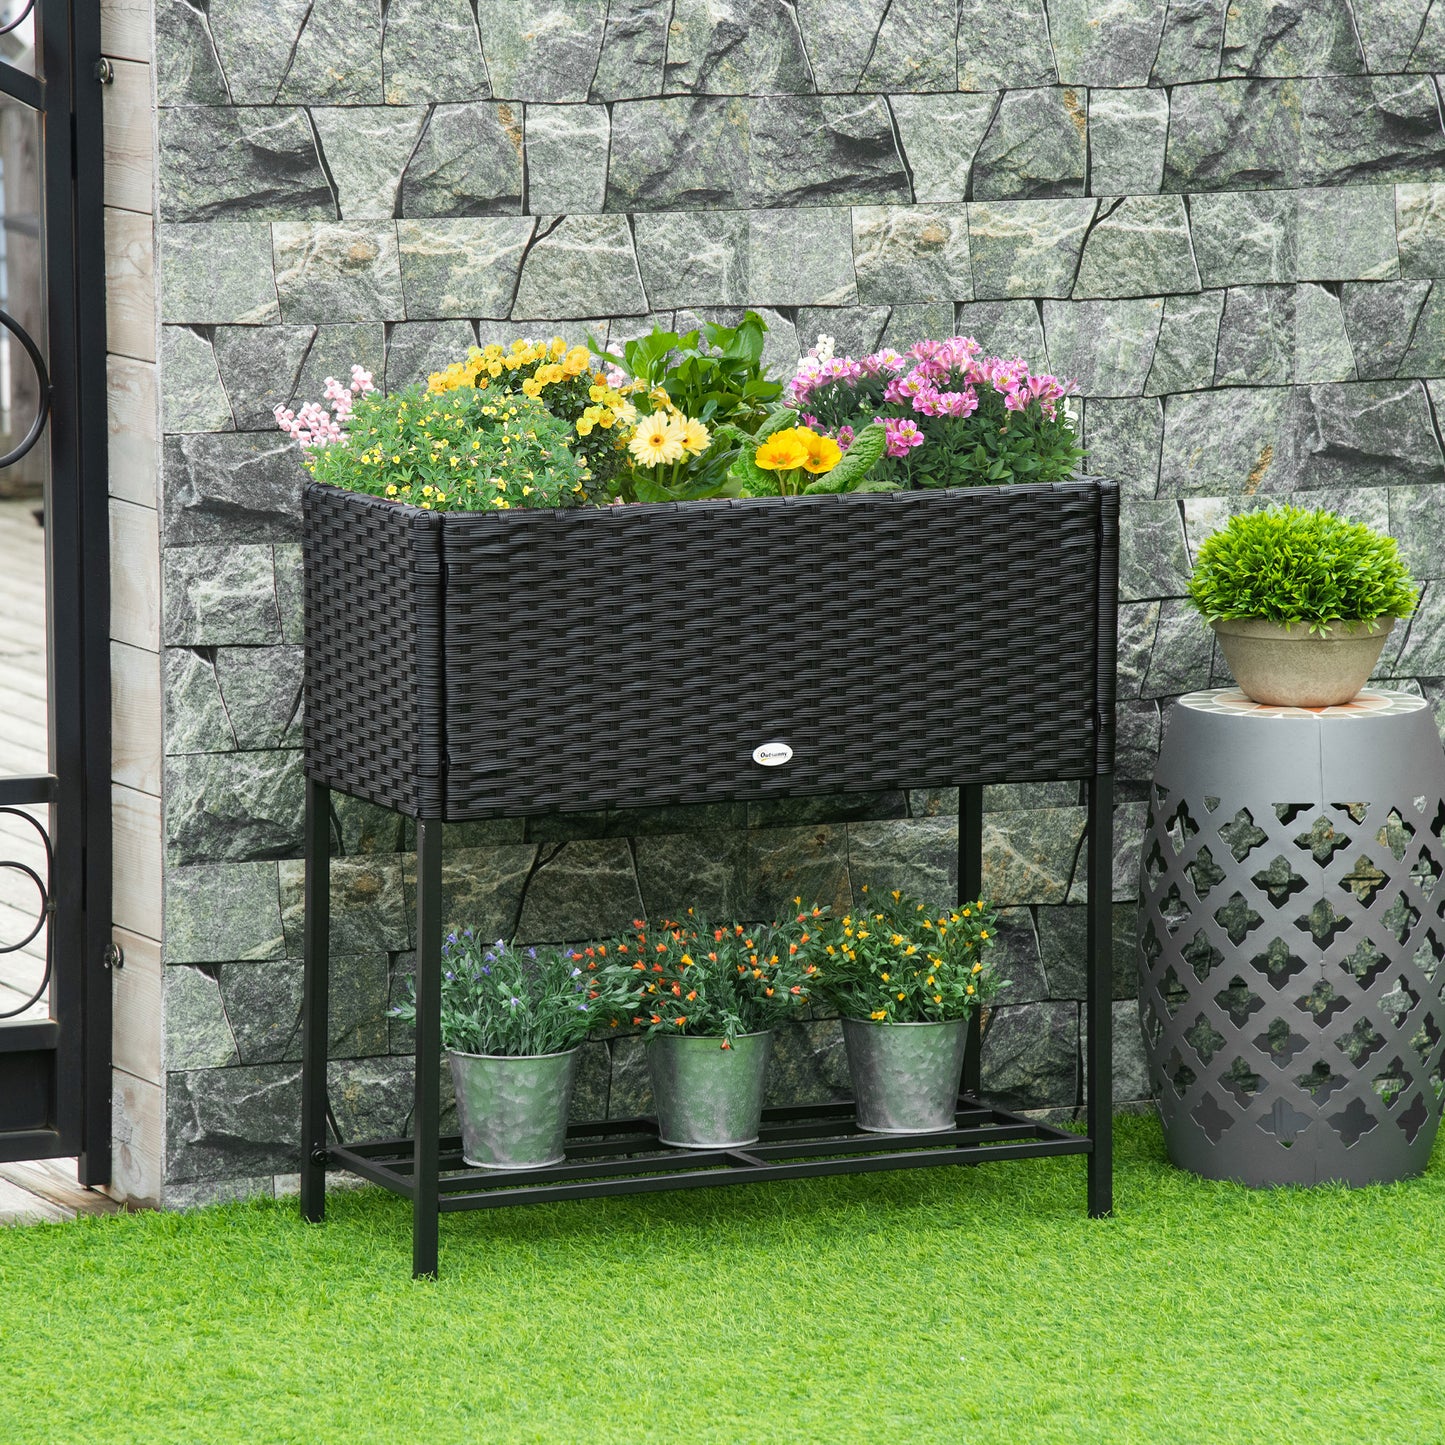 Rattan Raised Garden Boxes, Elevated Flower Beds with Storage Shelf for Herbs, Flowers, Vegetables, Black